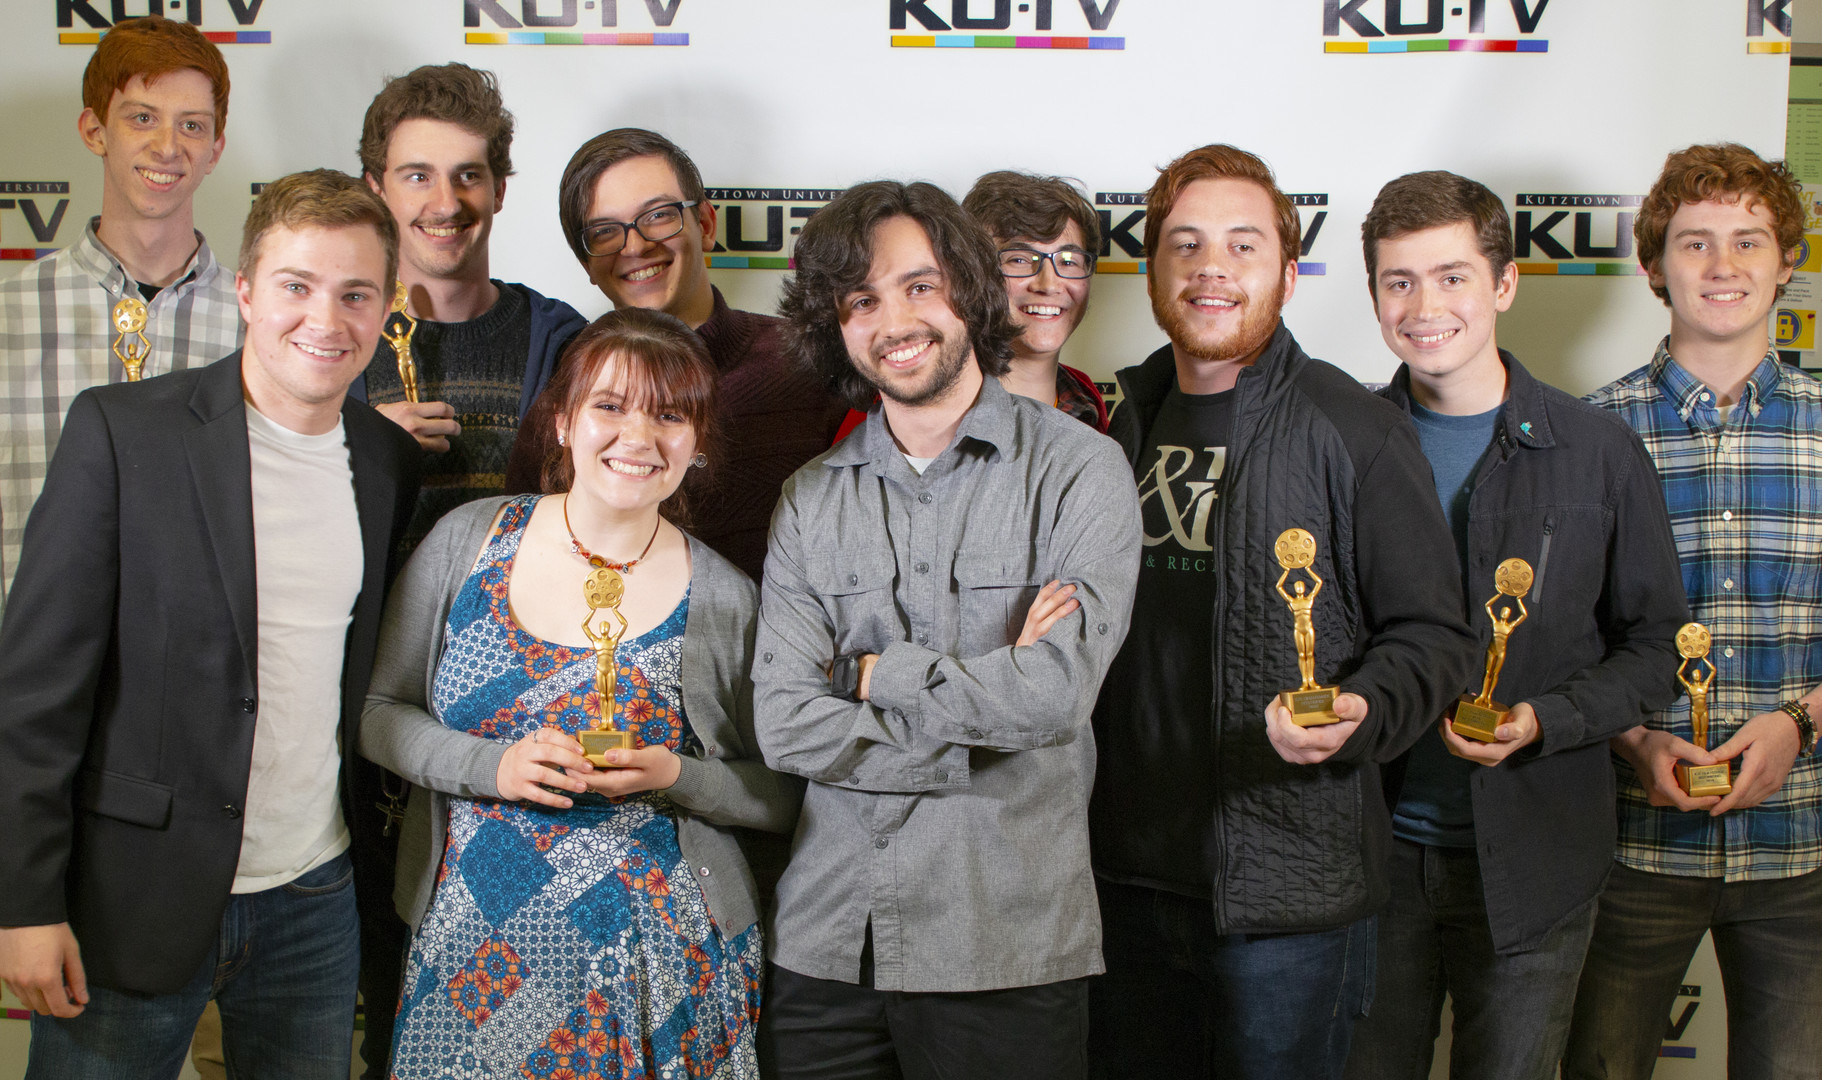 CTM students holding awards and smiling in front of wallpaper with the KU TV logo 